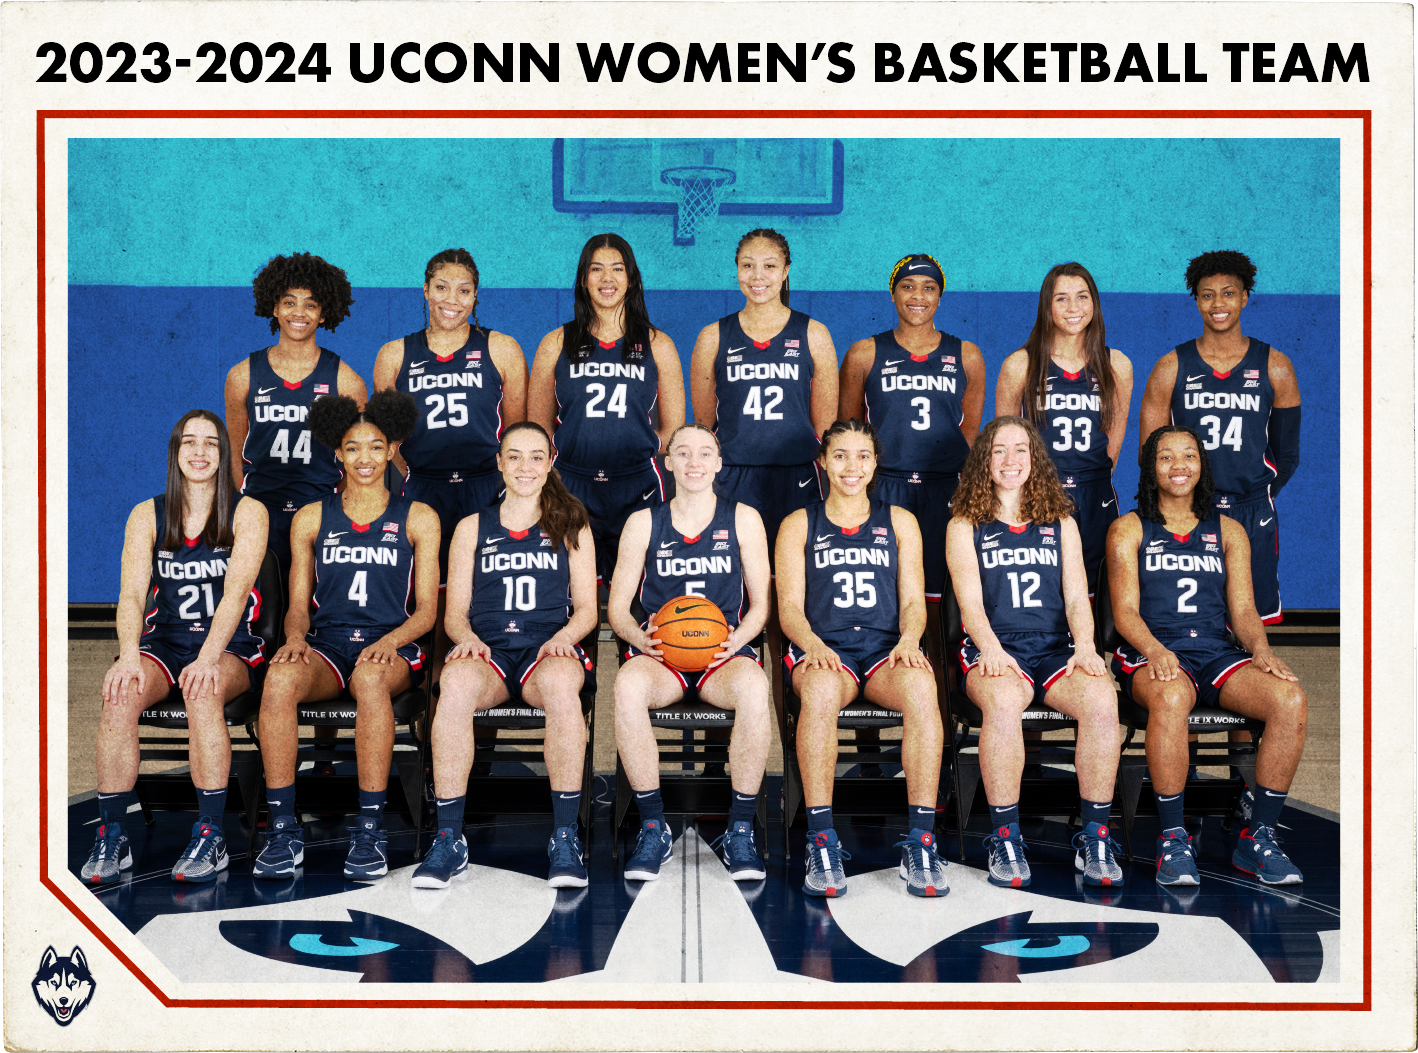 Vintage-style trading card showing a posed team picture of the 2023-2024 UConn women’s Basketball Team in a gymnasium.